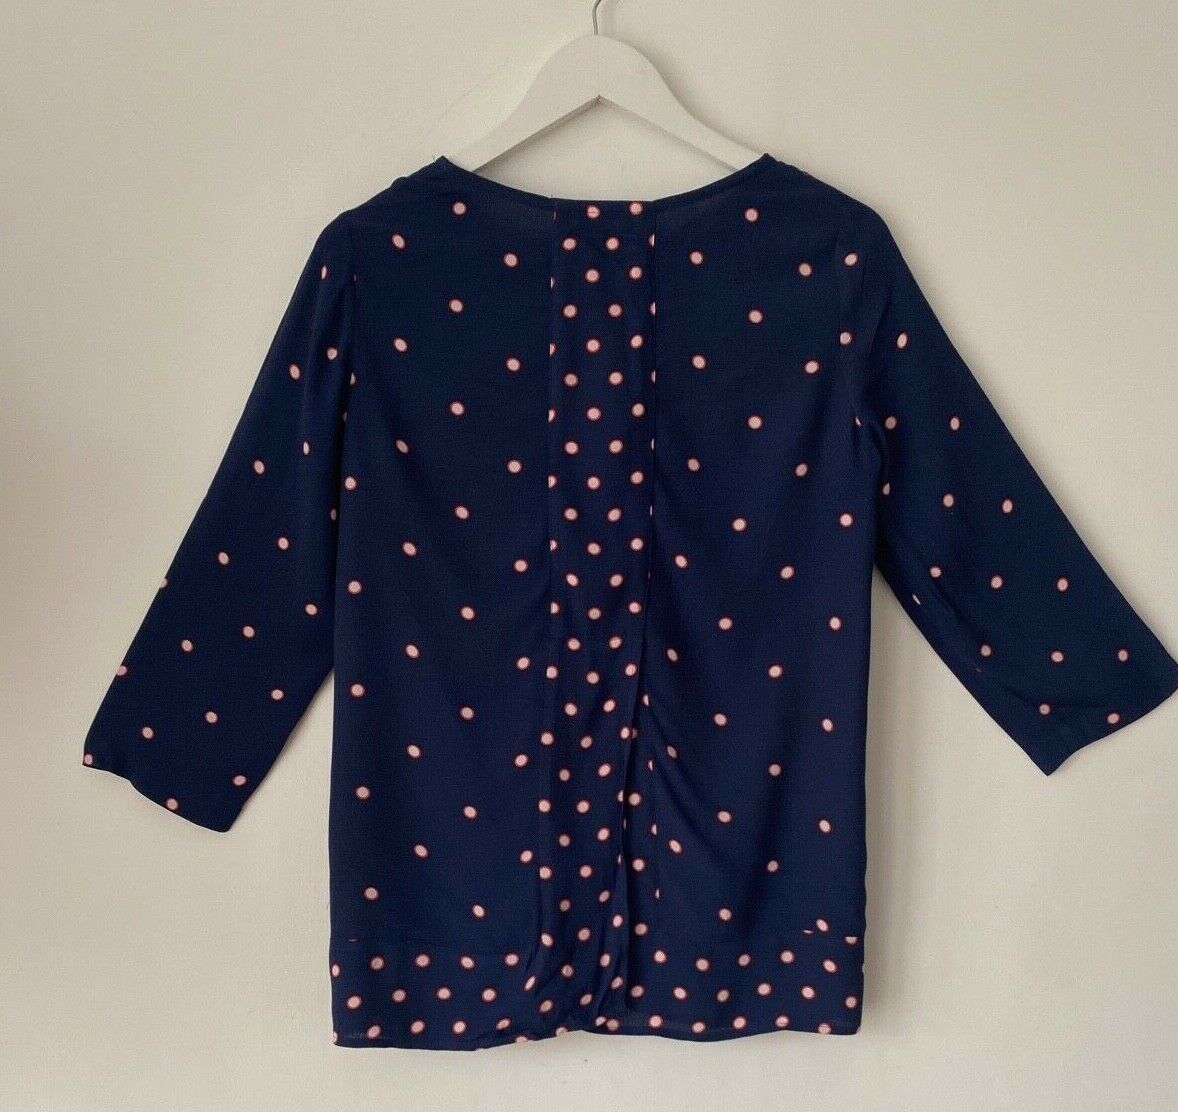 Joules Leah Woven Printed in French Navy Blouse Size 6